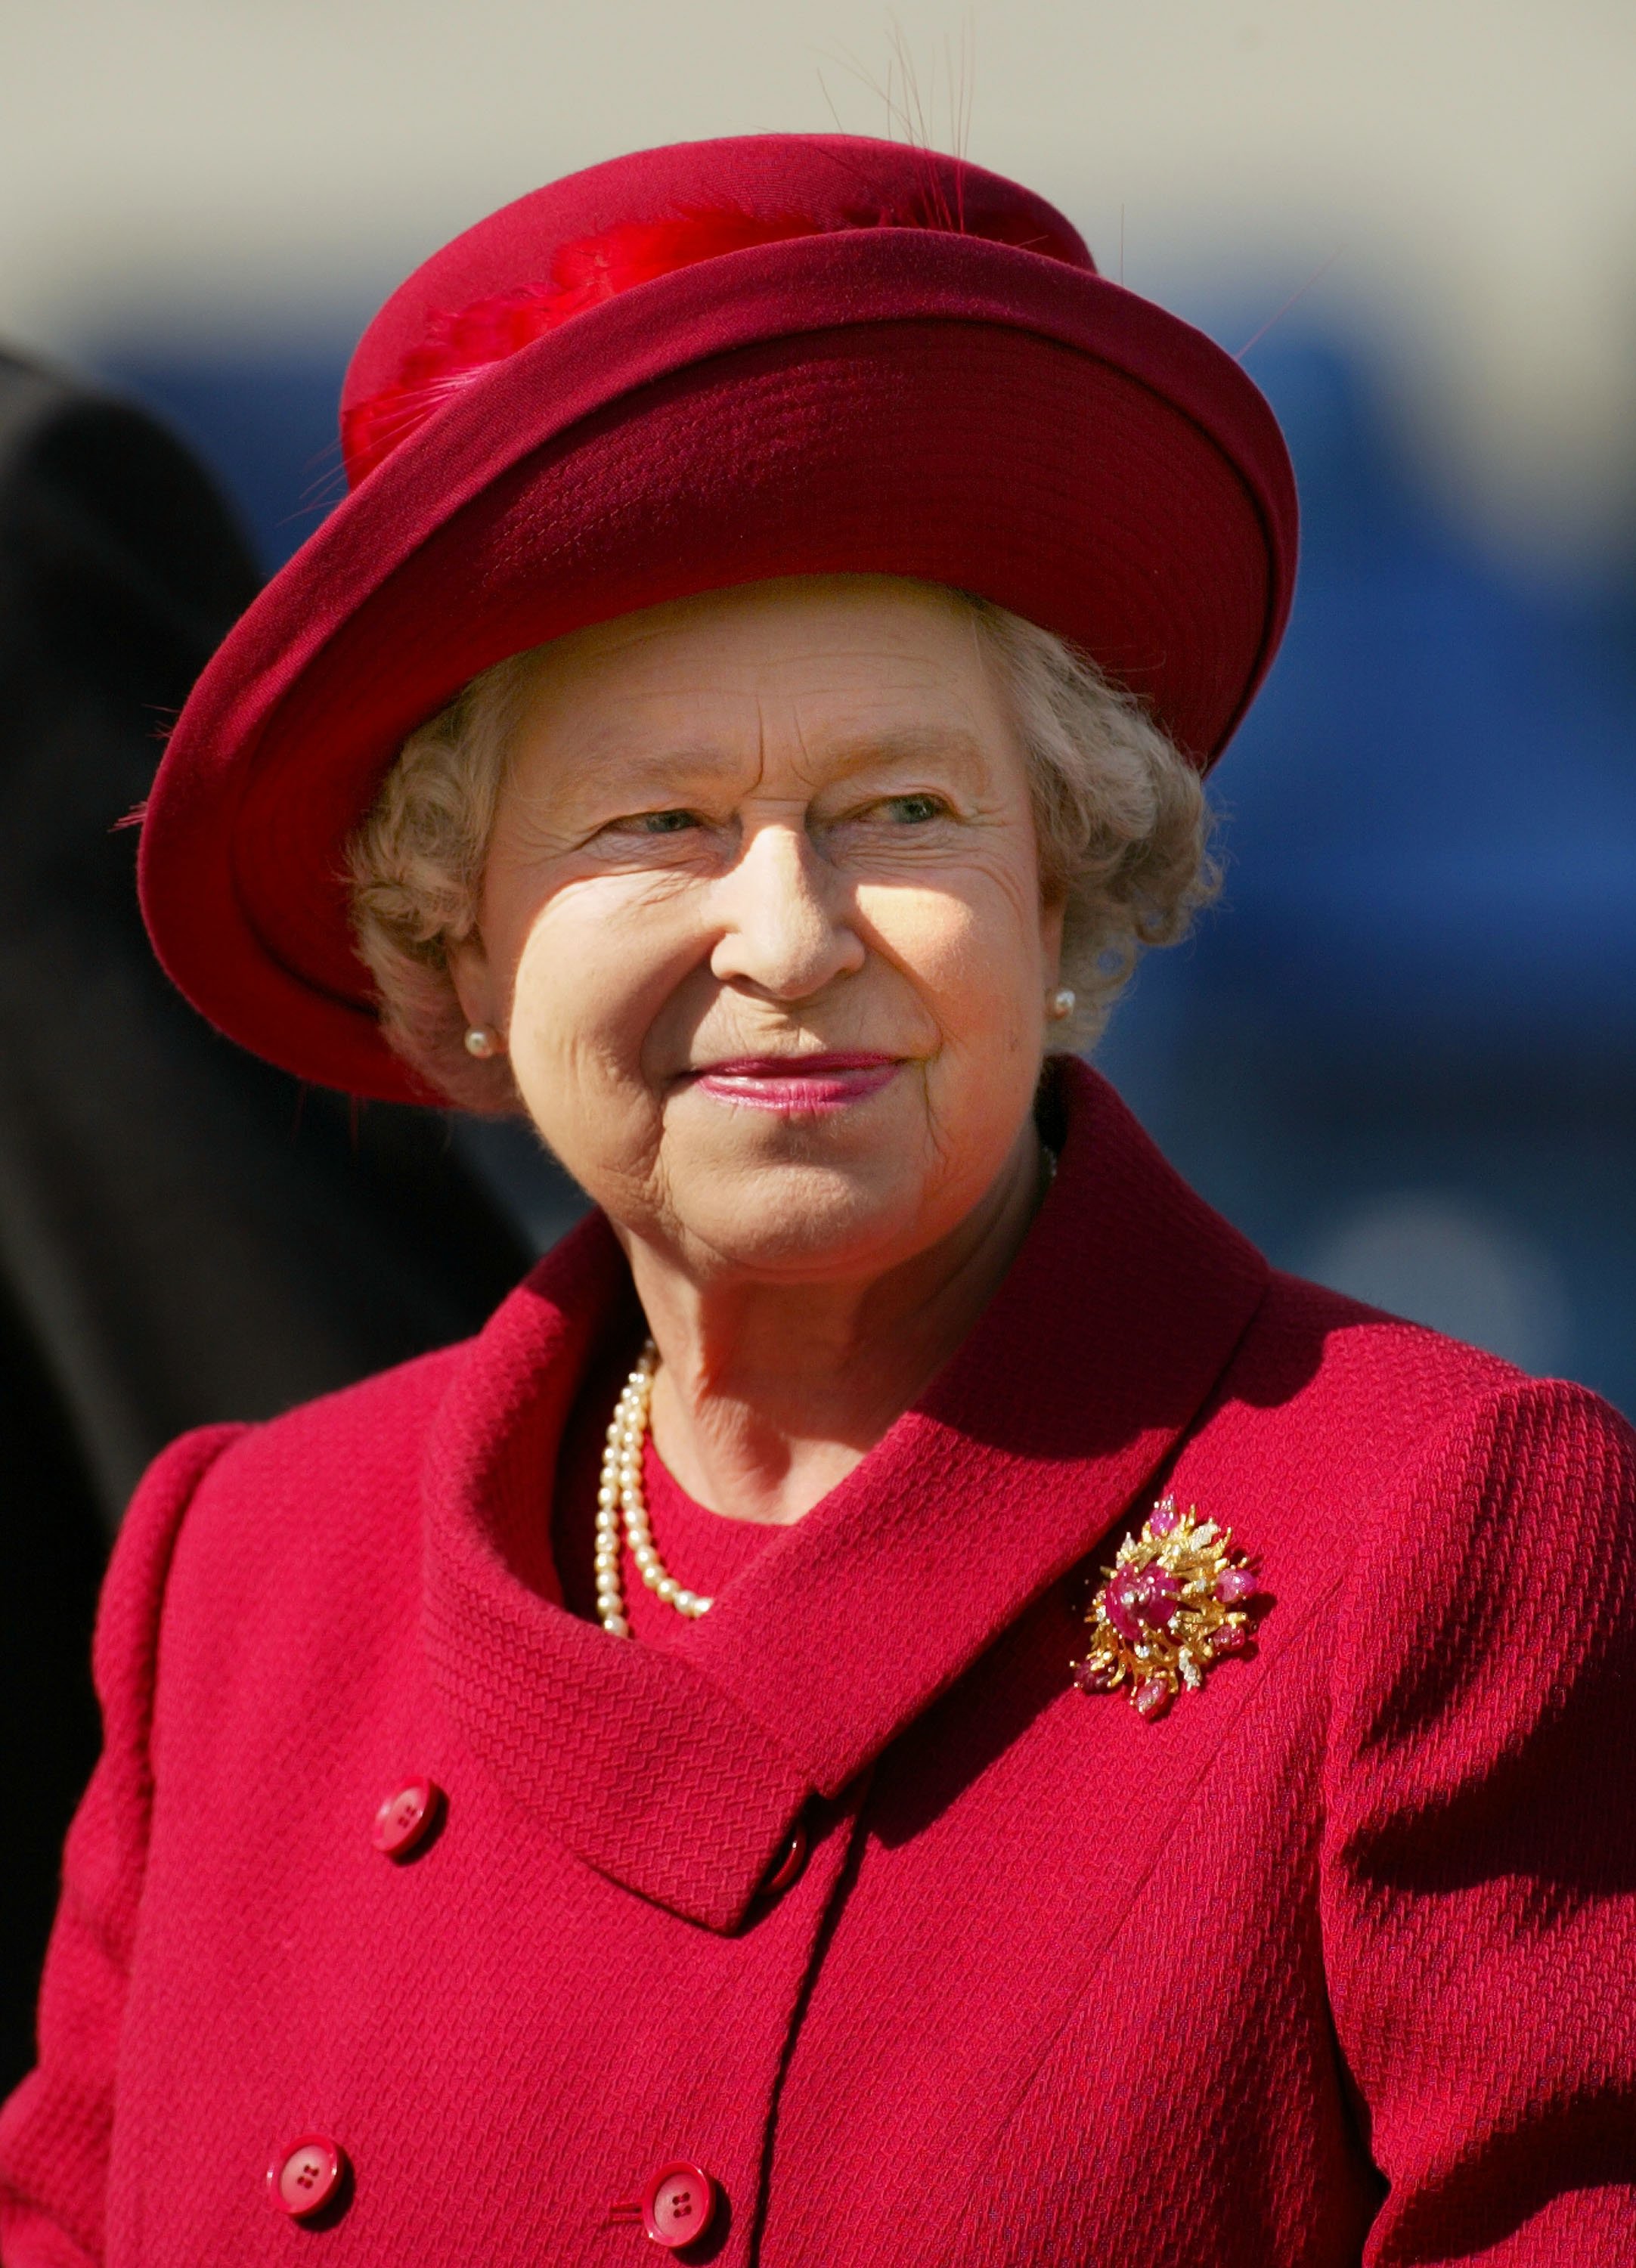 Queen Elizabeth during a 2002 horse show in Windsor Great Park. | Photo: Getty Images